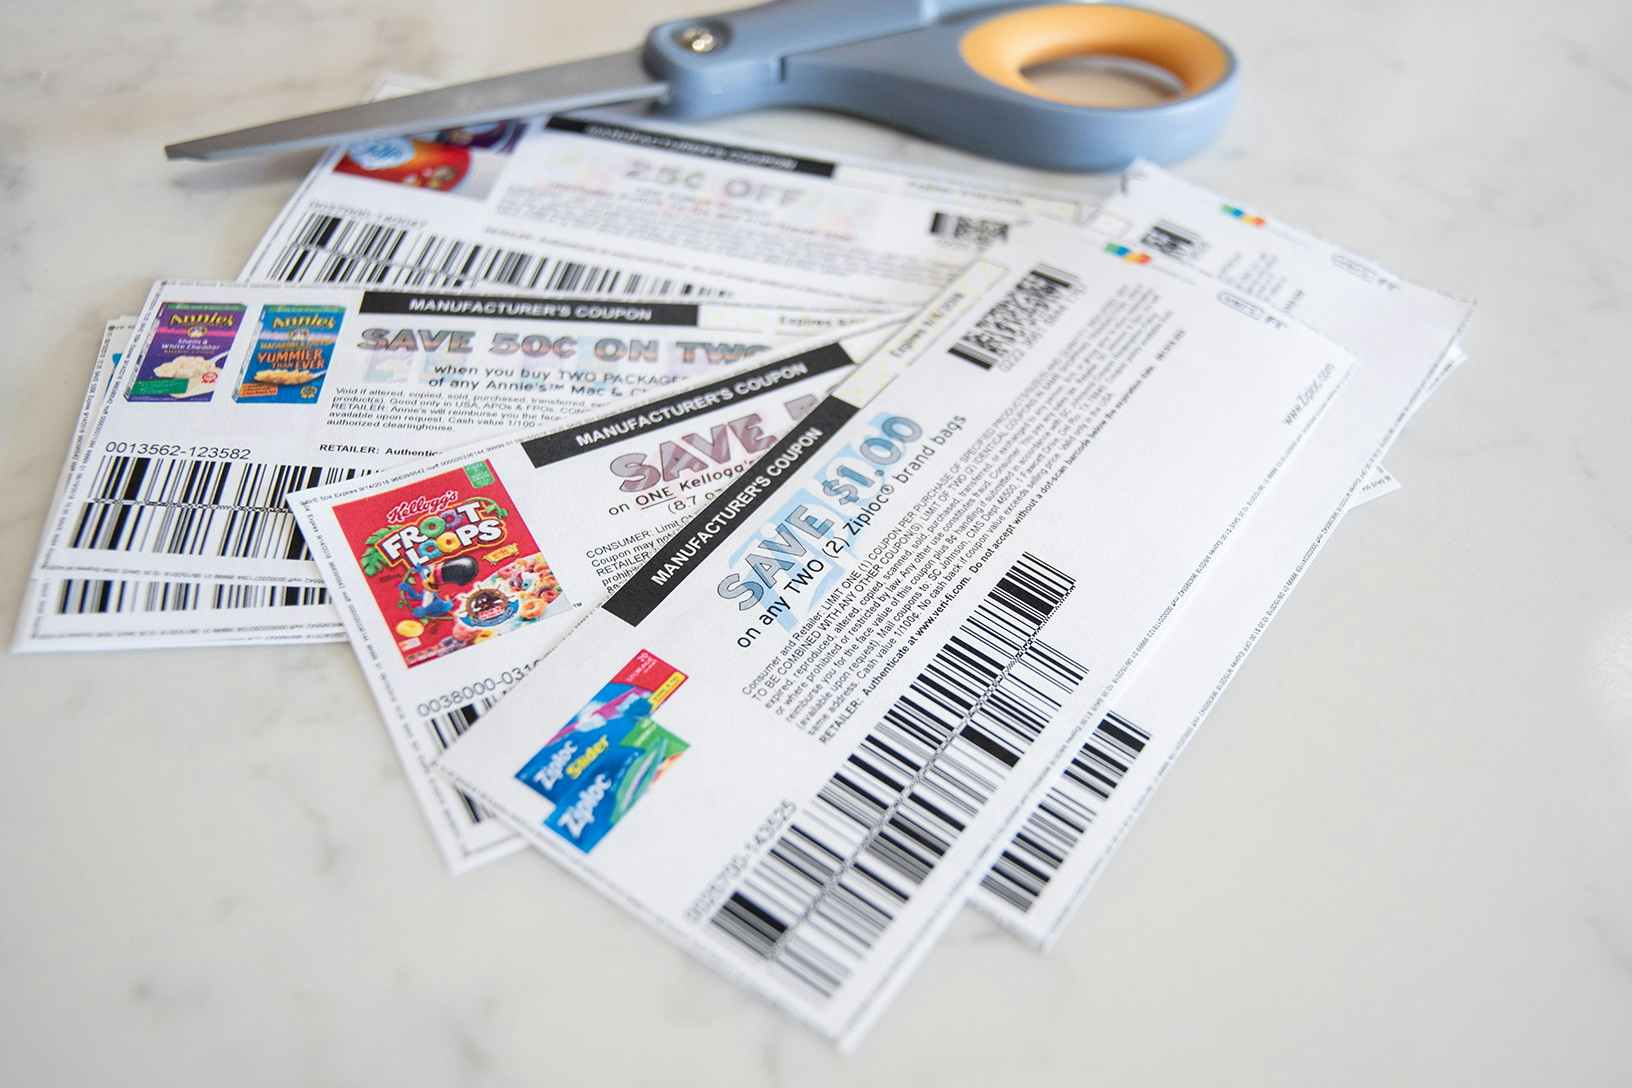 Where to Buy Stamps and How to Save Money on Them — The Krazy Coupon Lady